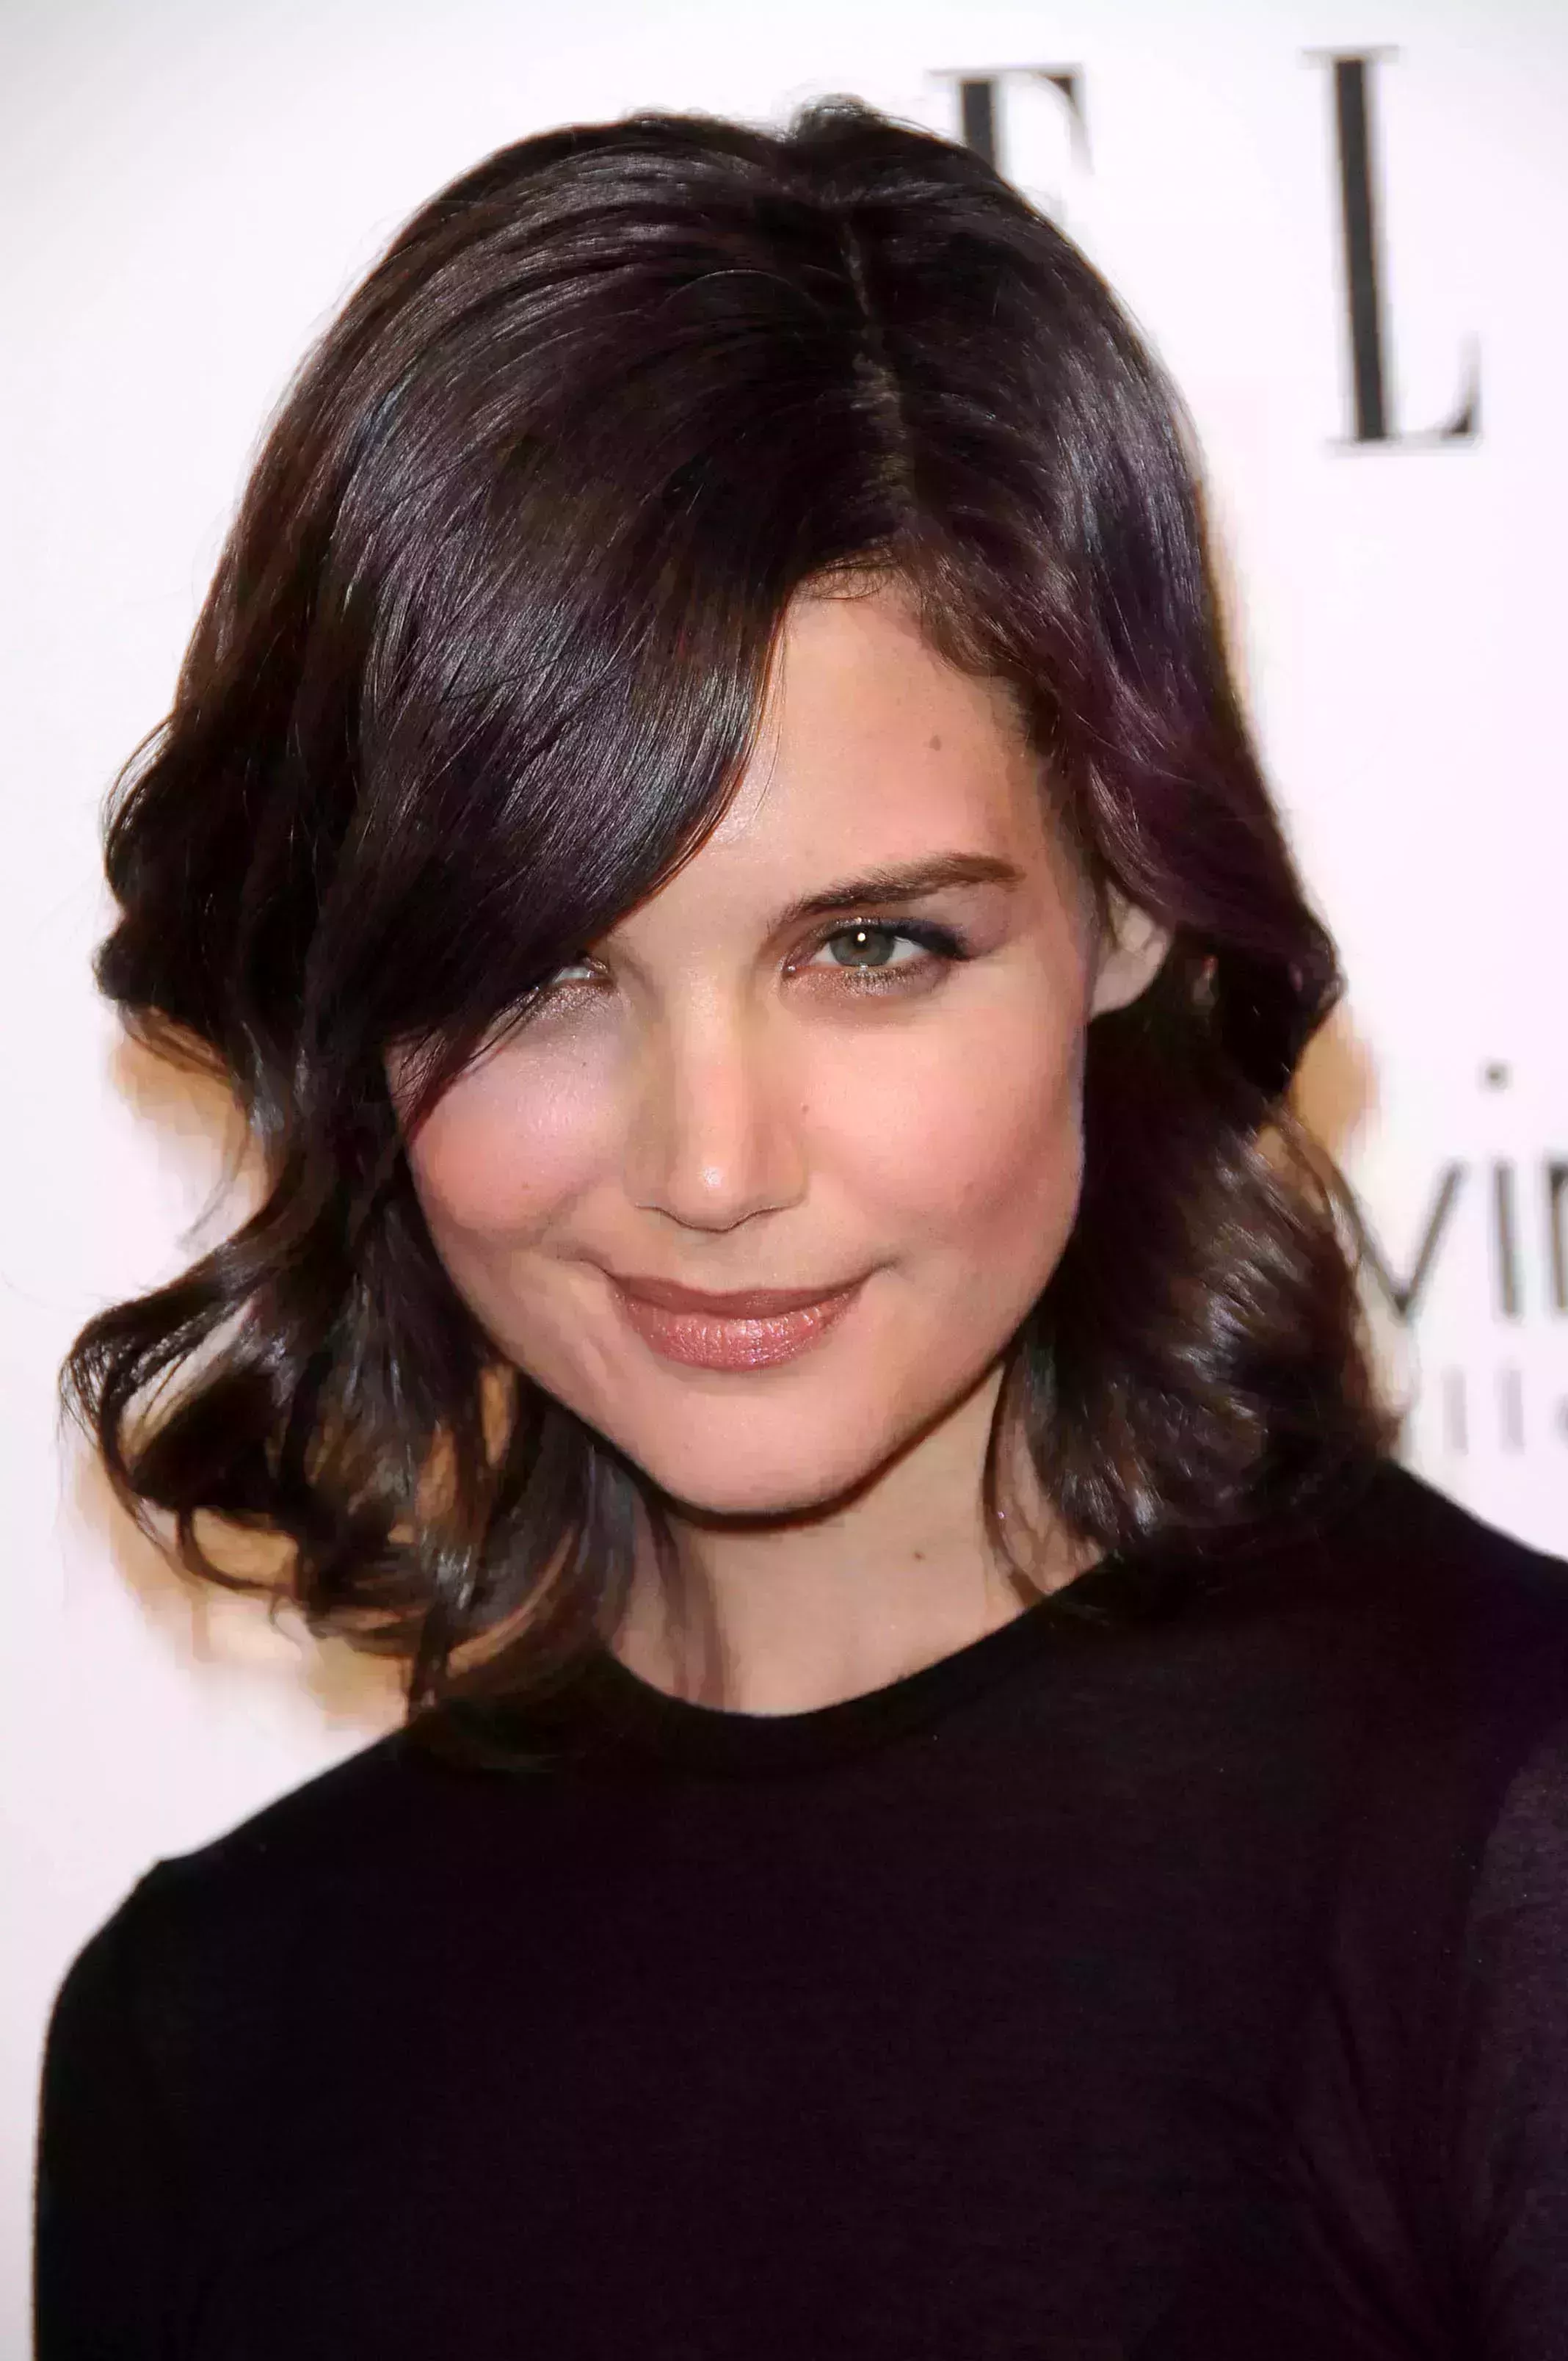 Katie Holmes’ Mid-Length Curls With Side Bangs